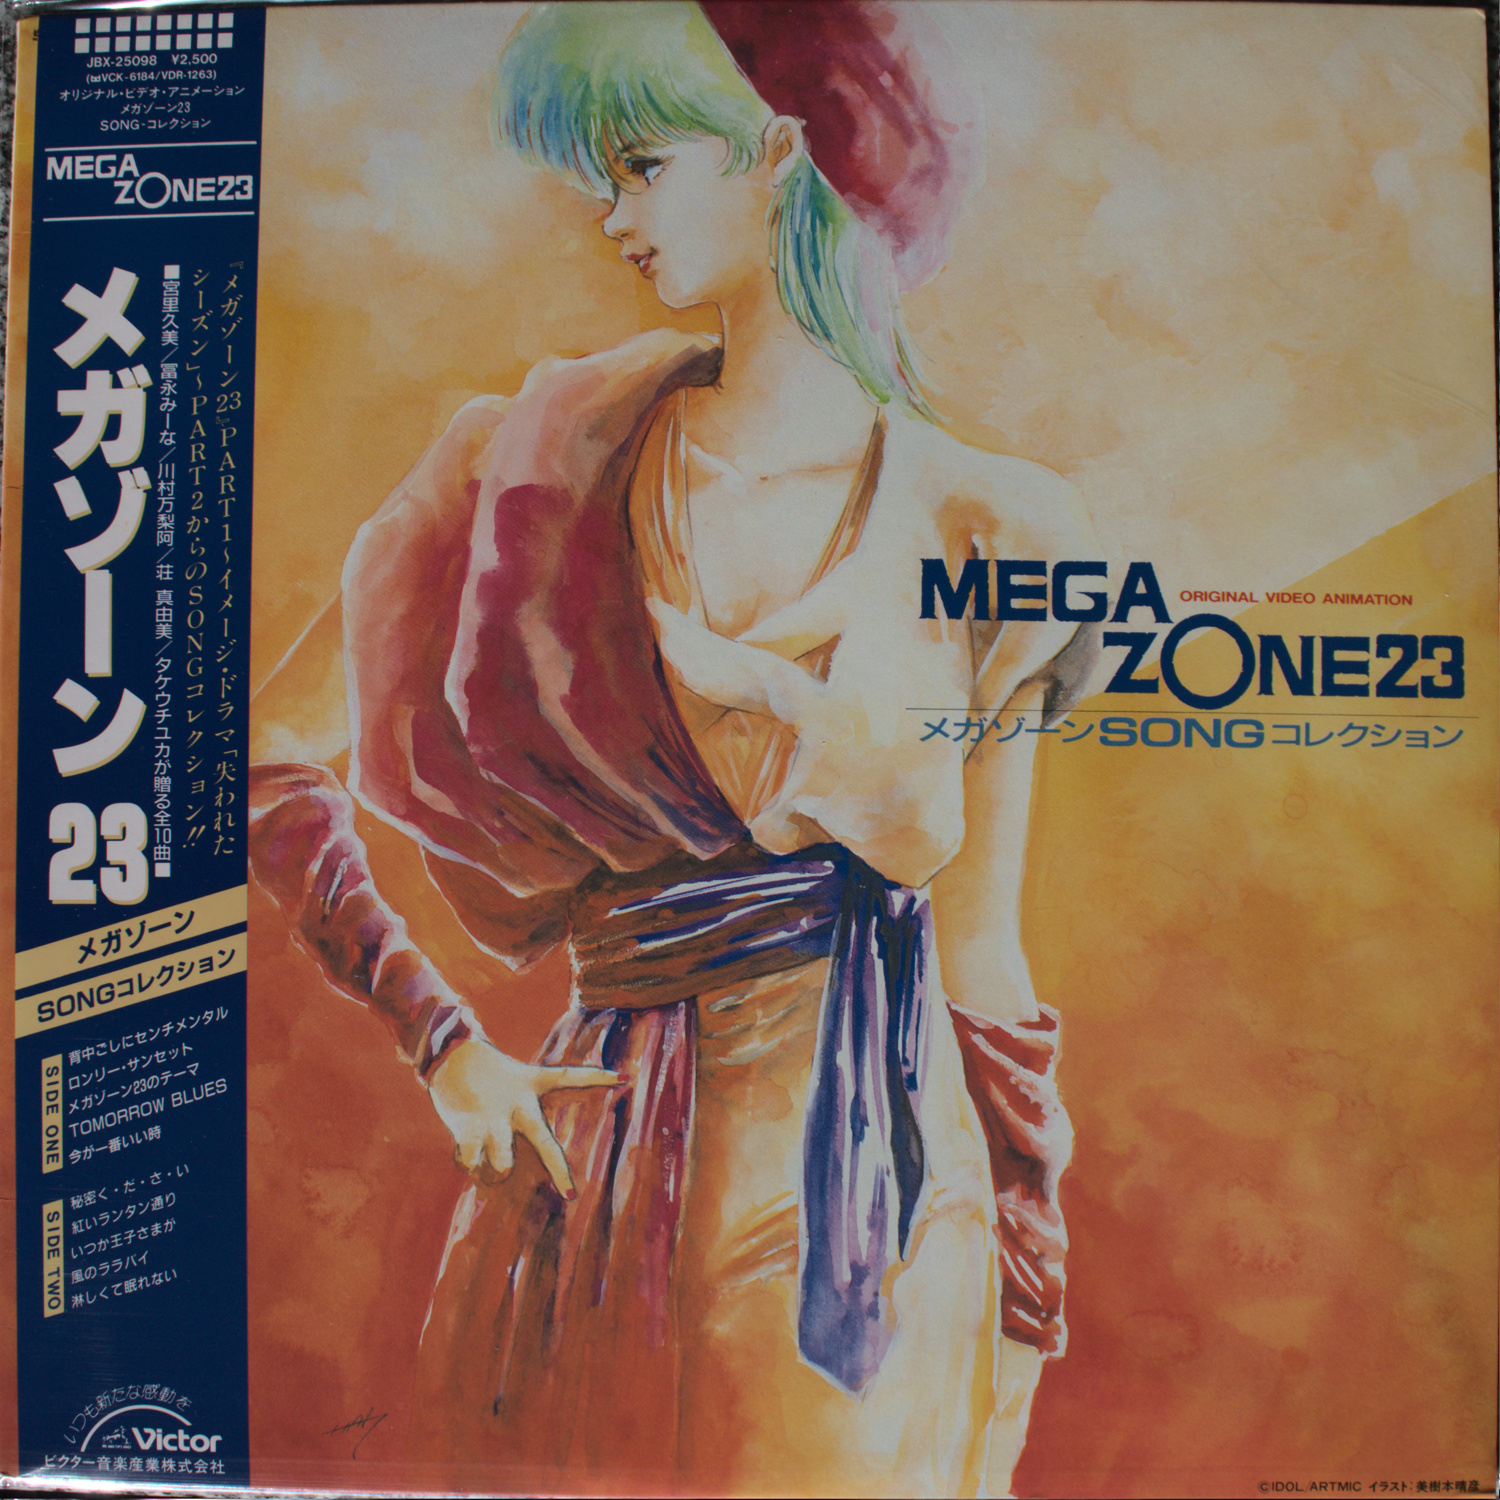 Release “MEGAZONE 23: メガゾーンSONGコレクション” by Various 